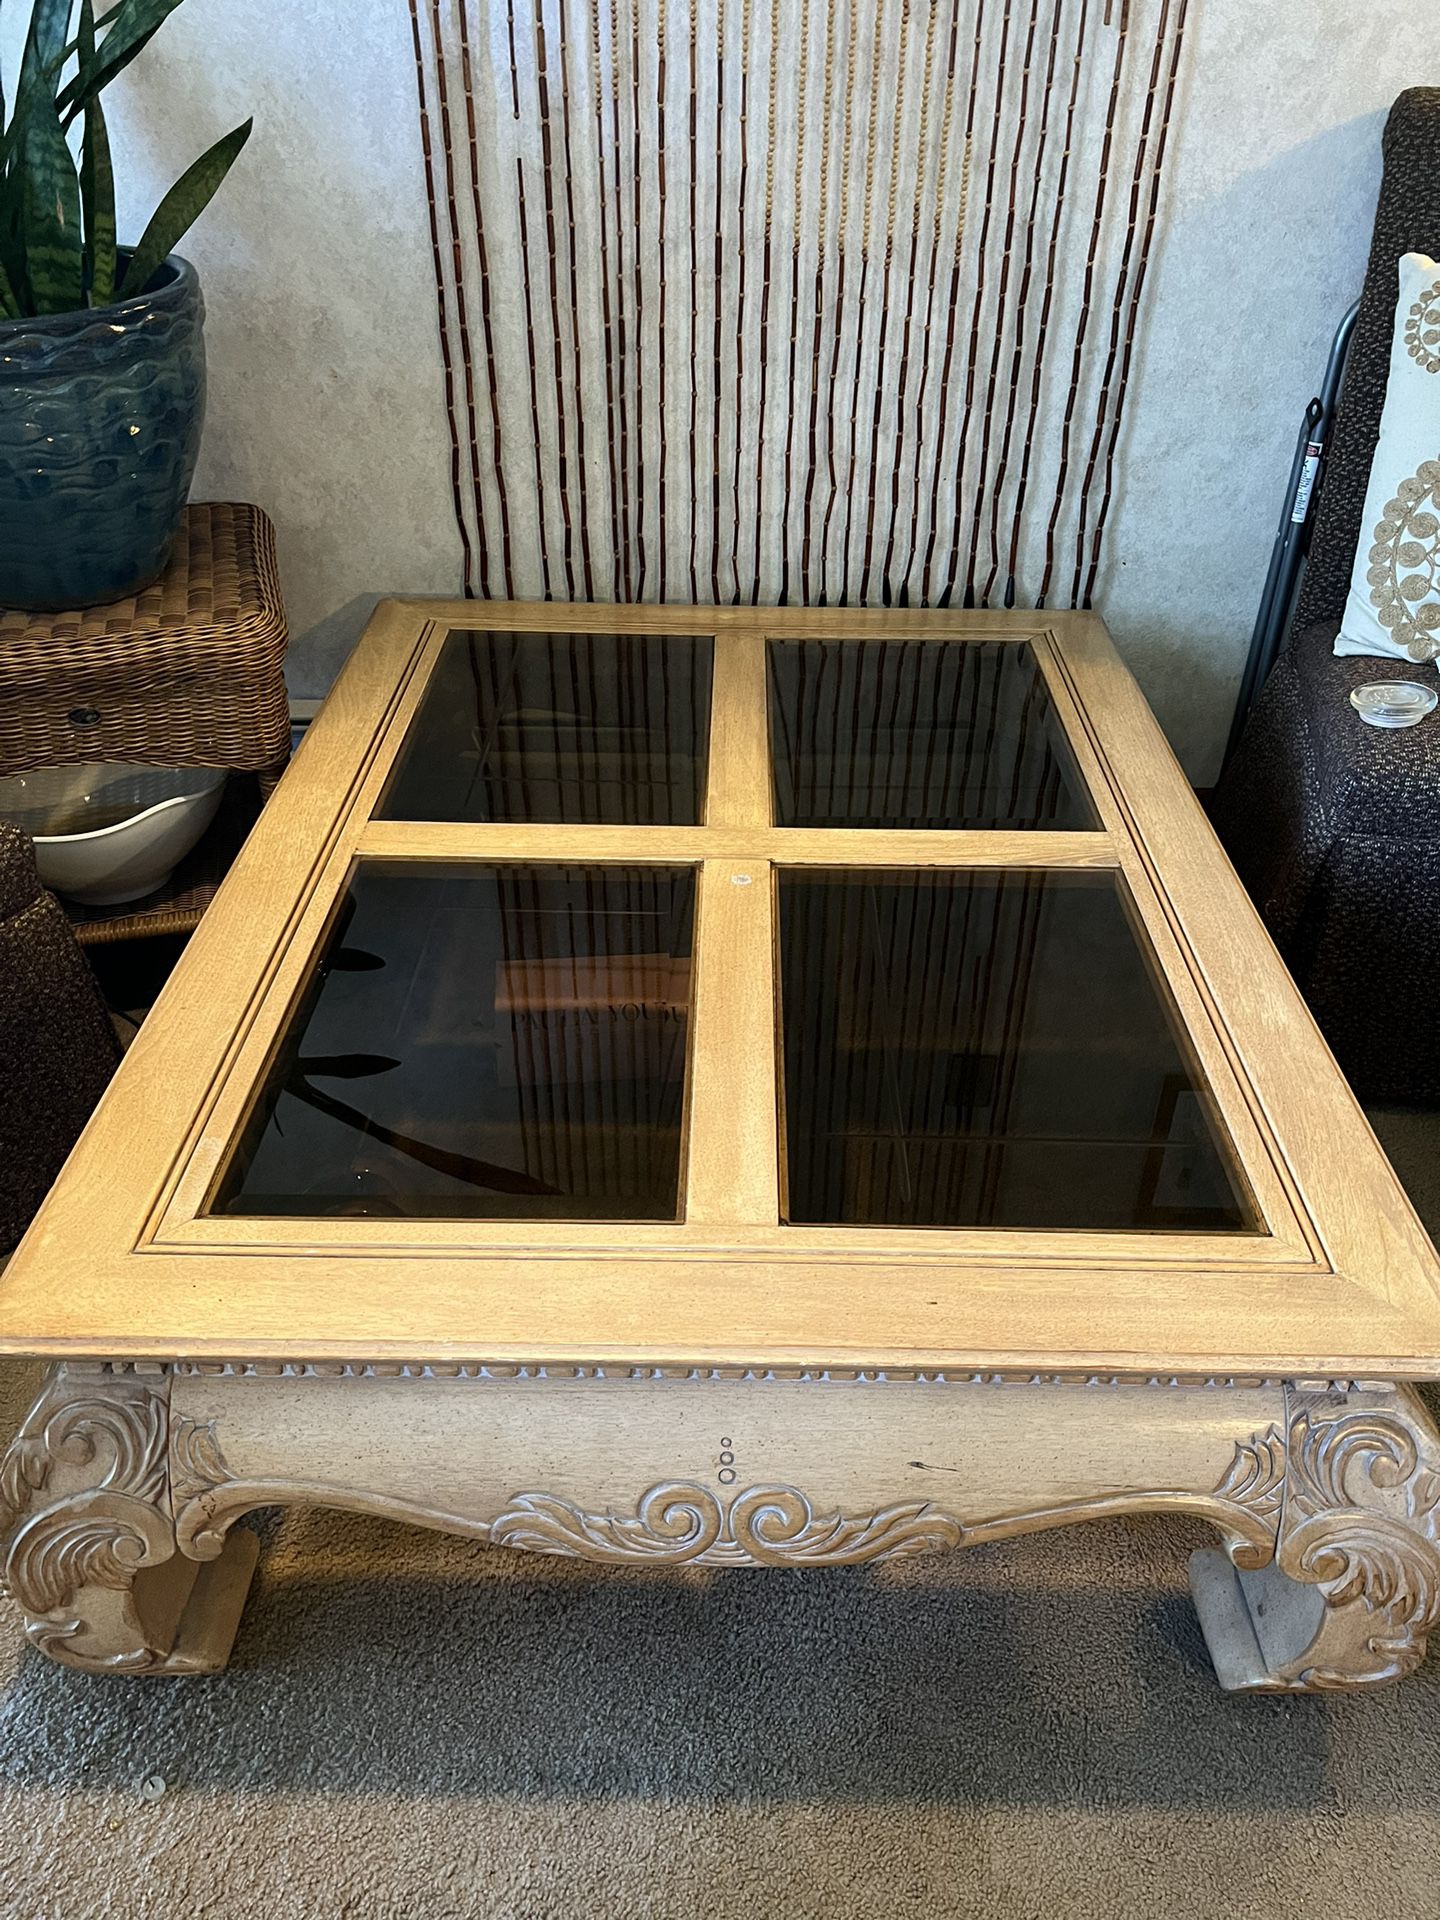 Gorgeous, Solid Blonde Wood Carved With Smoky Brown Beveled Glass On Top In Very Very Good Condition Age Unknown